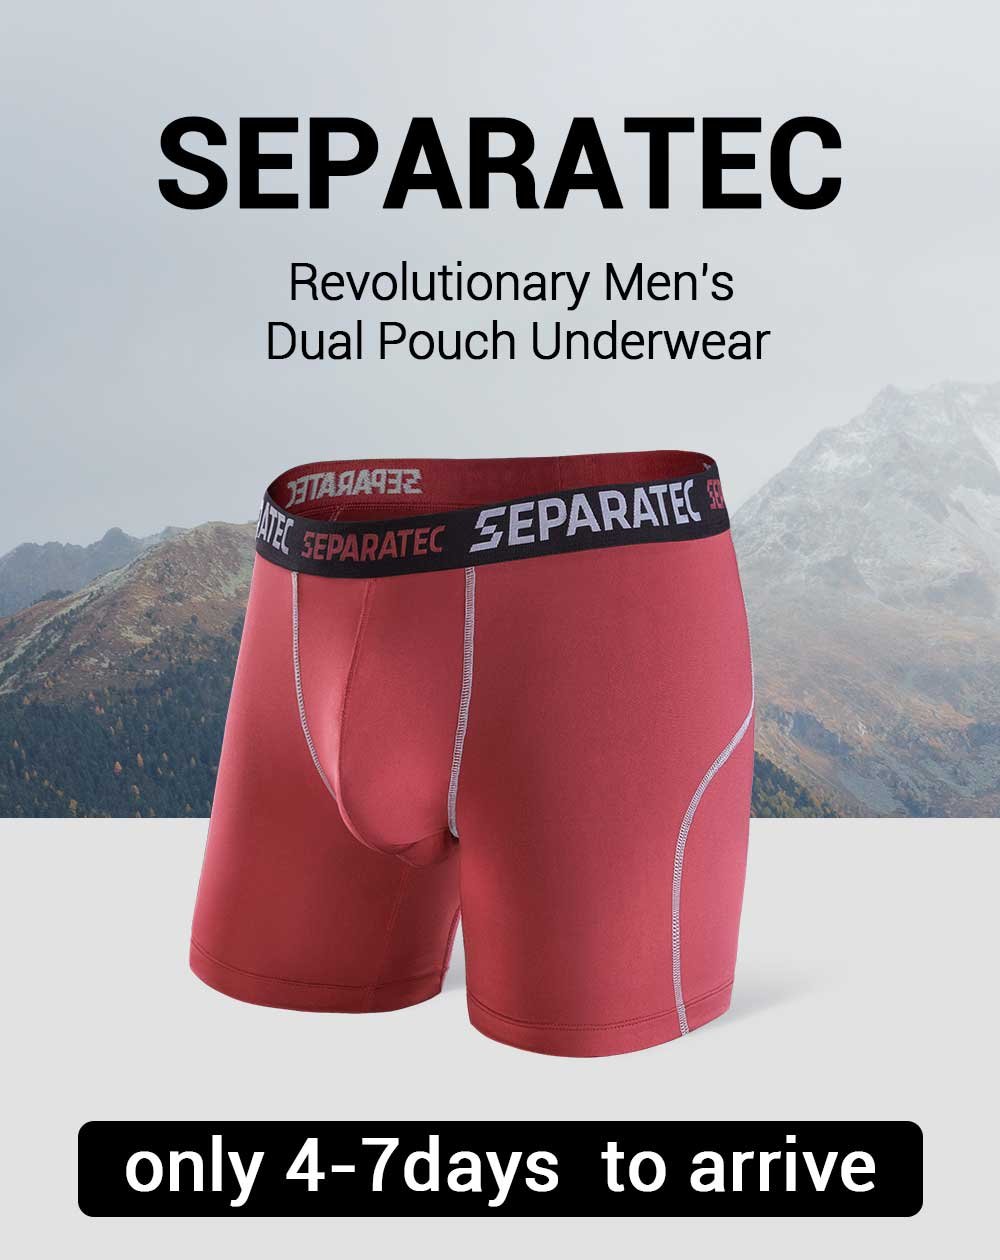 Separatec Underwear - Don't let anyone tell you what you can and